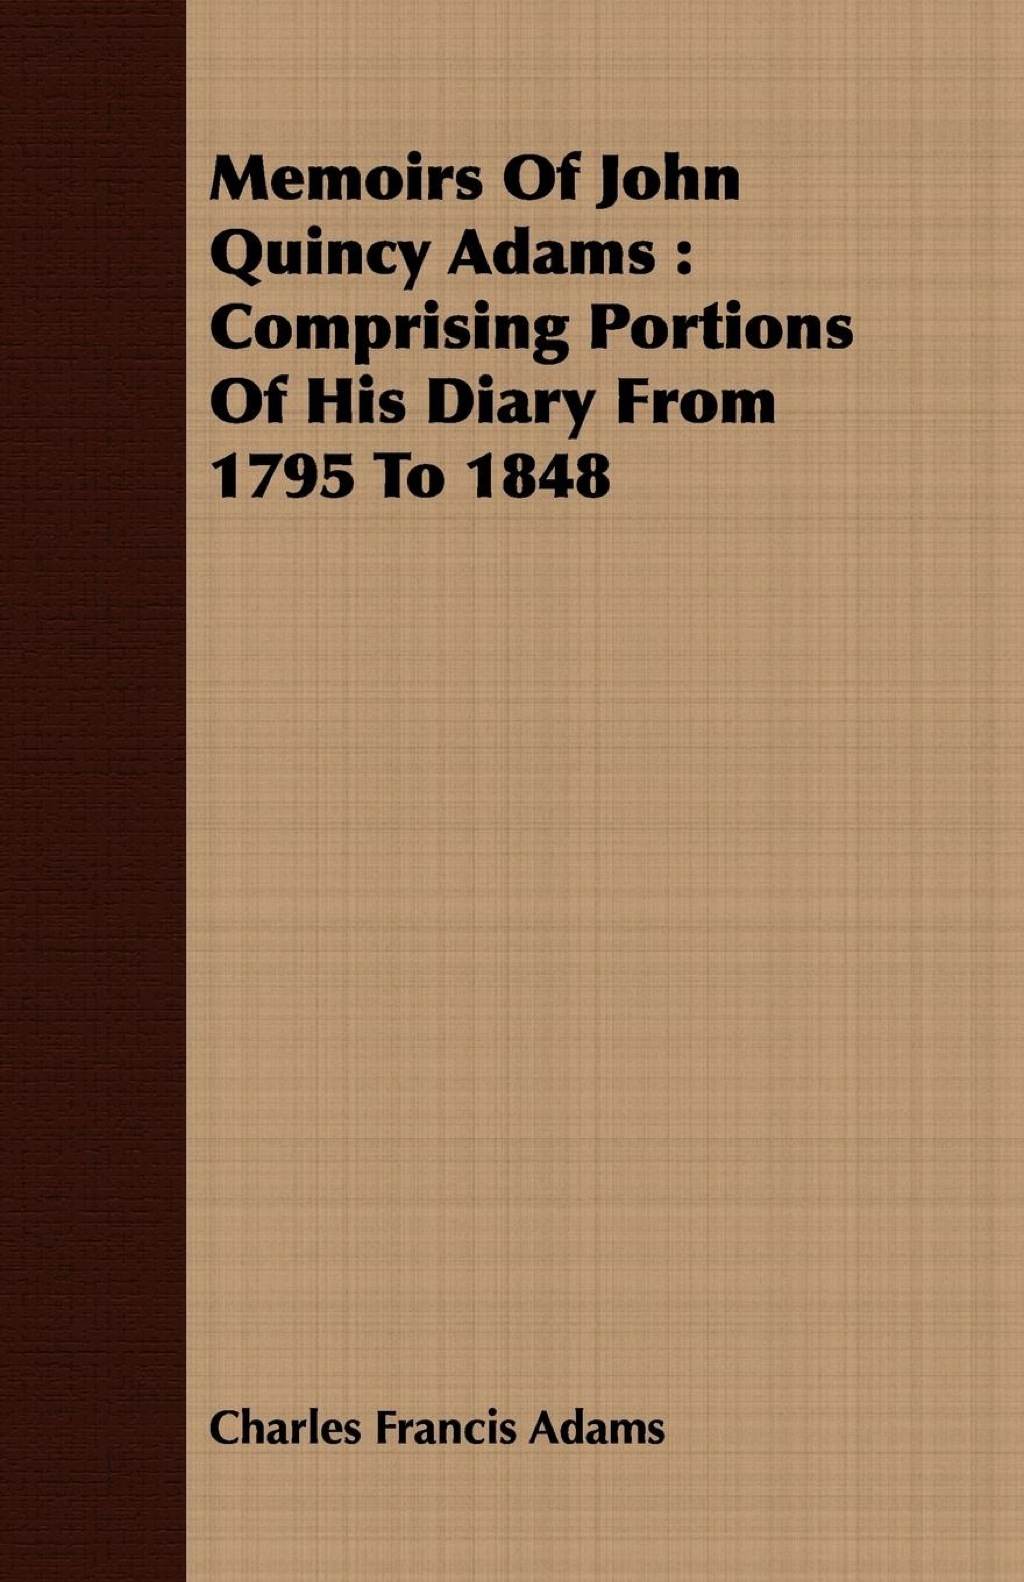 Memoirs of John Quincy Adams: Comprising Portions of His Diary from 1795 to 1848. Vol 1 (eBook) - Charles Francis Adams,